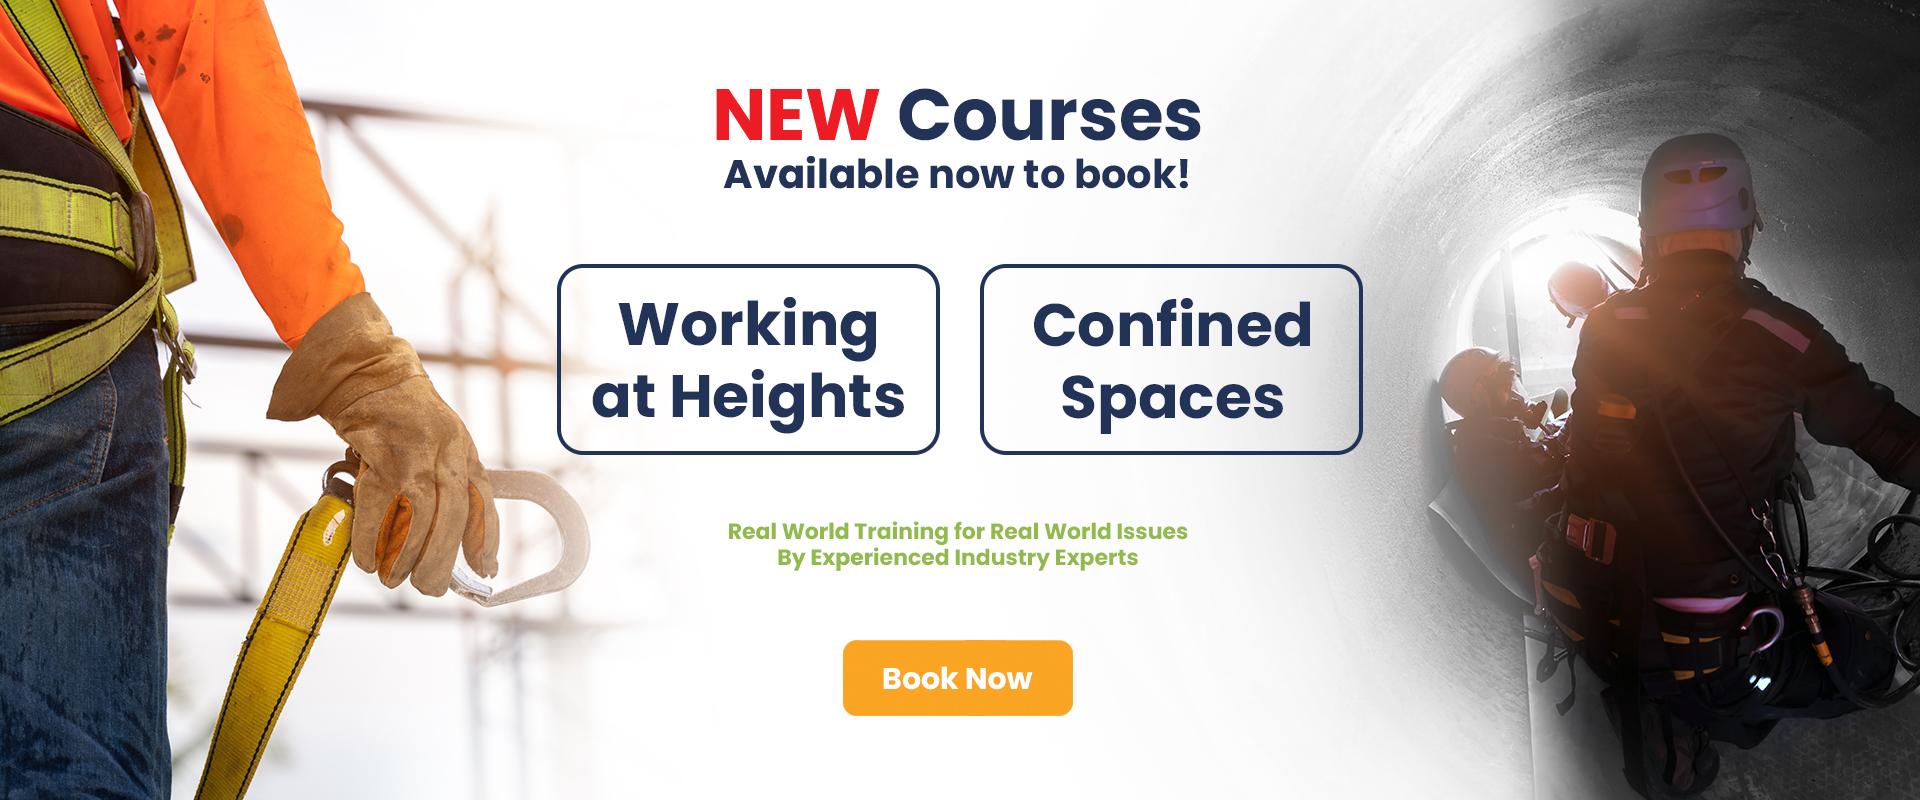 Promotional banner for safety training courses, featuring images of a worker in a harness and a person in confined space gear, with text offering "new courses" on "working at heights" and "confined spaces.